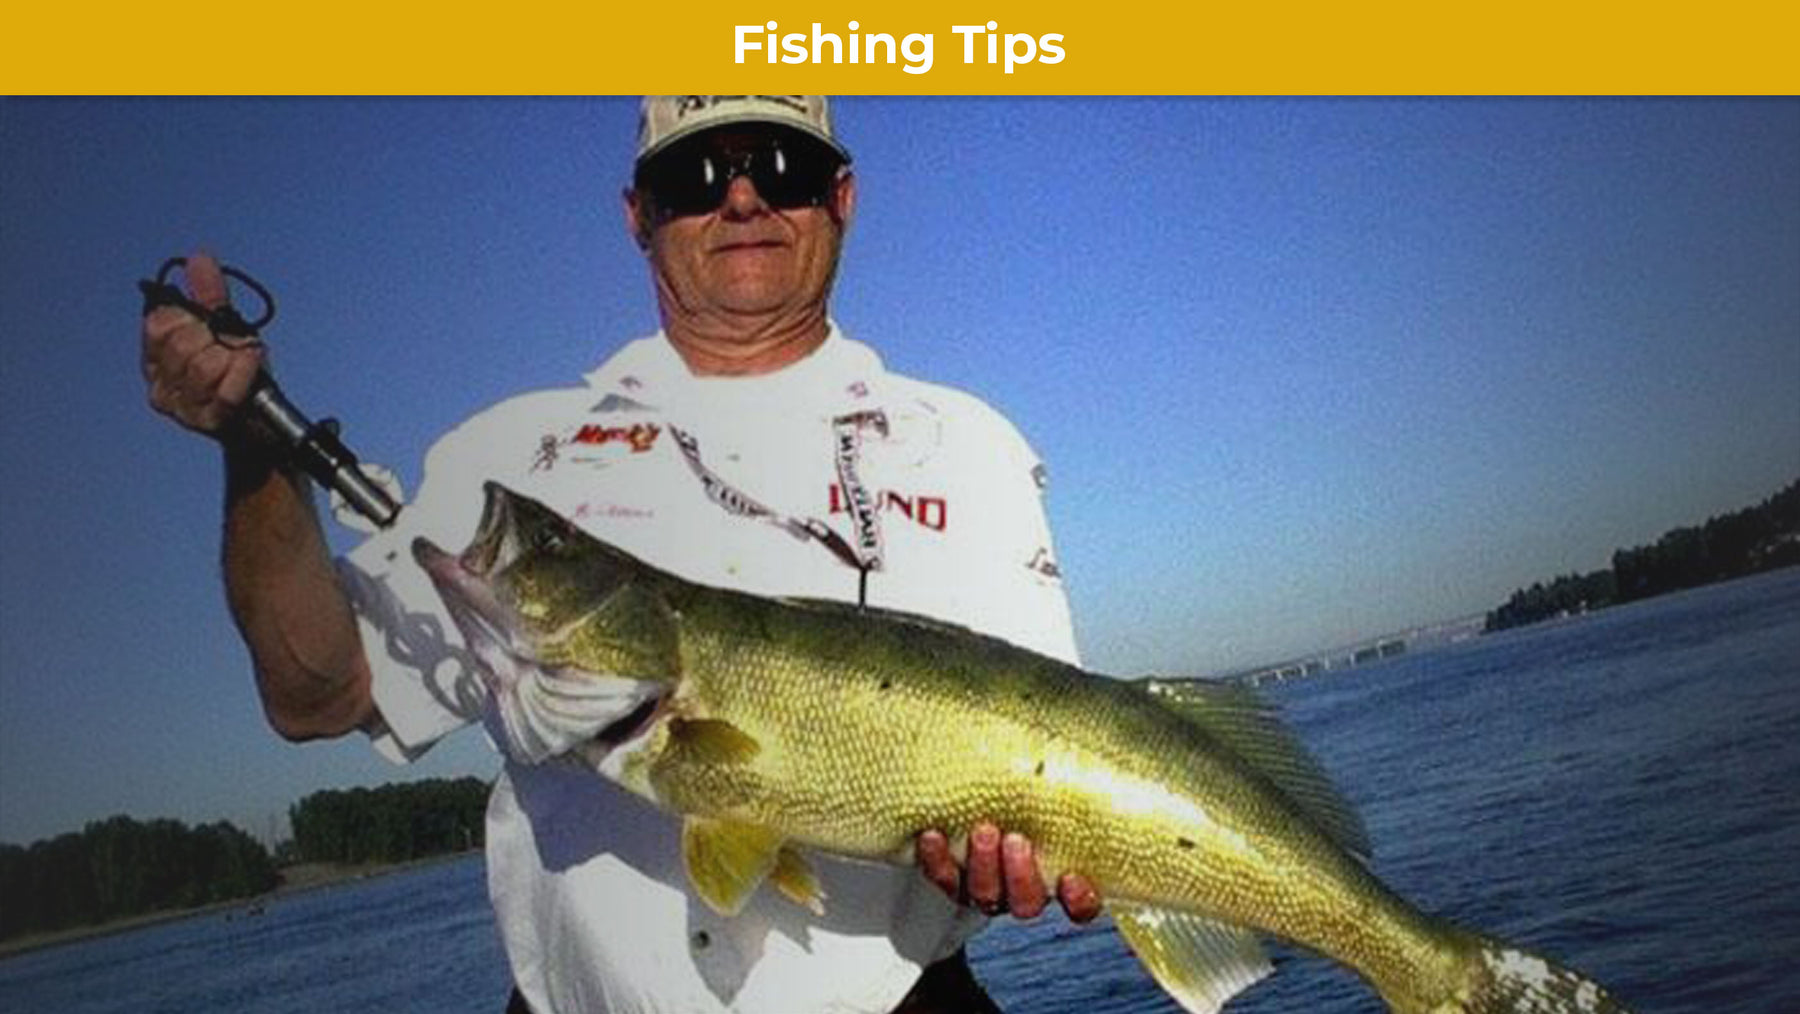 Expert Tips: Let Those Walleye Have It!